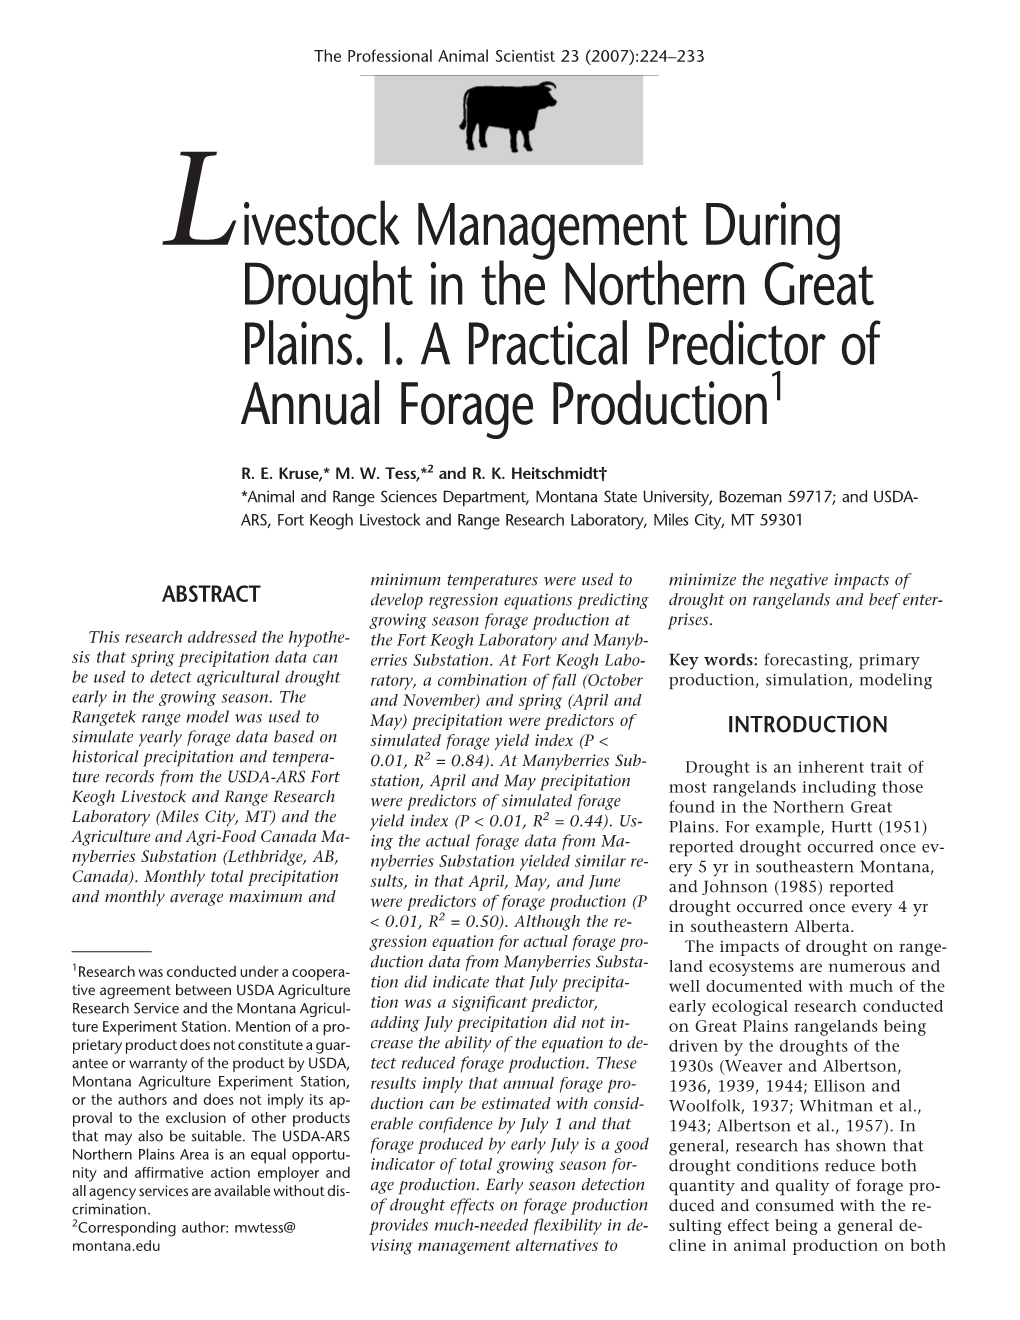 Livestock Management During Drought in the Northern Great Plains. I. a Practical Predictor of Annual Forage Production1